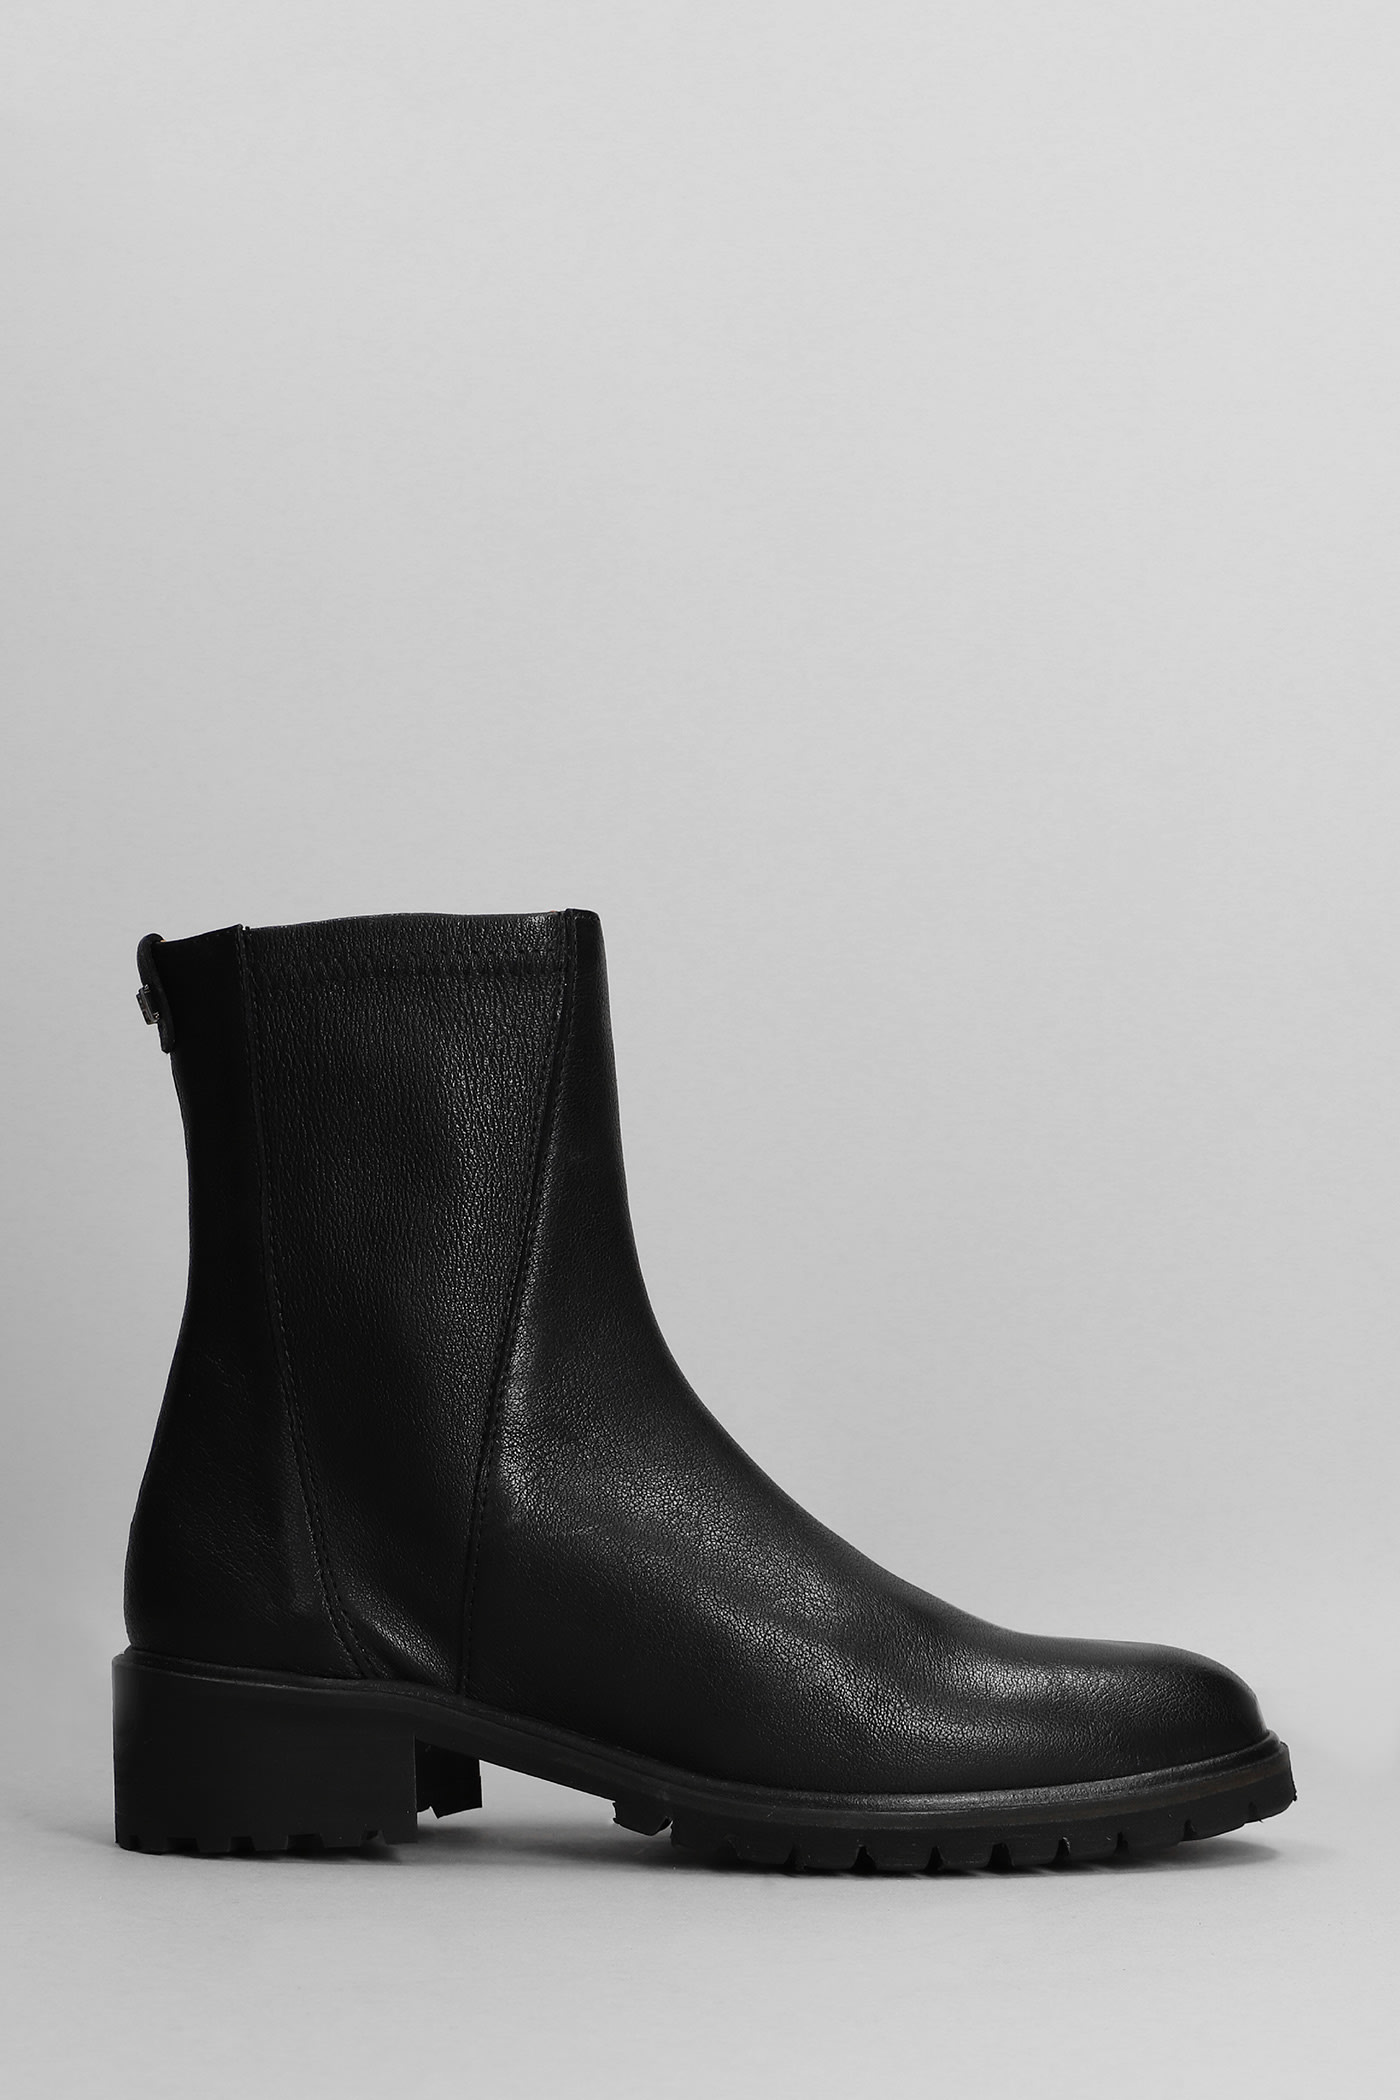 Pedro Miralles Low Heels Ankle Boots In Black Leather